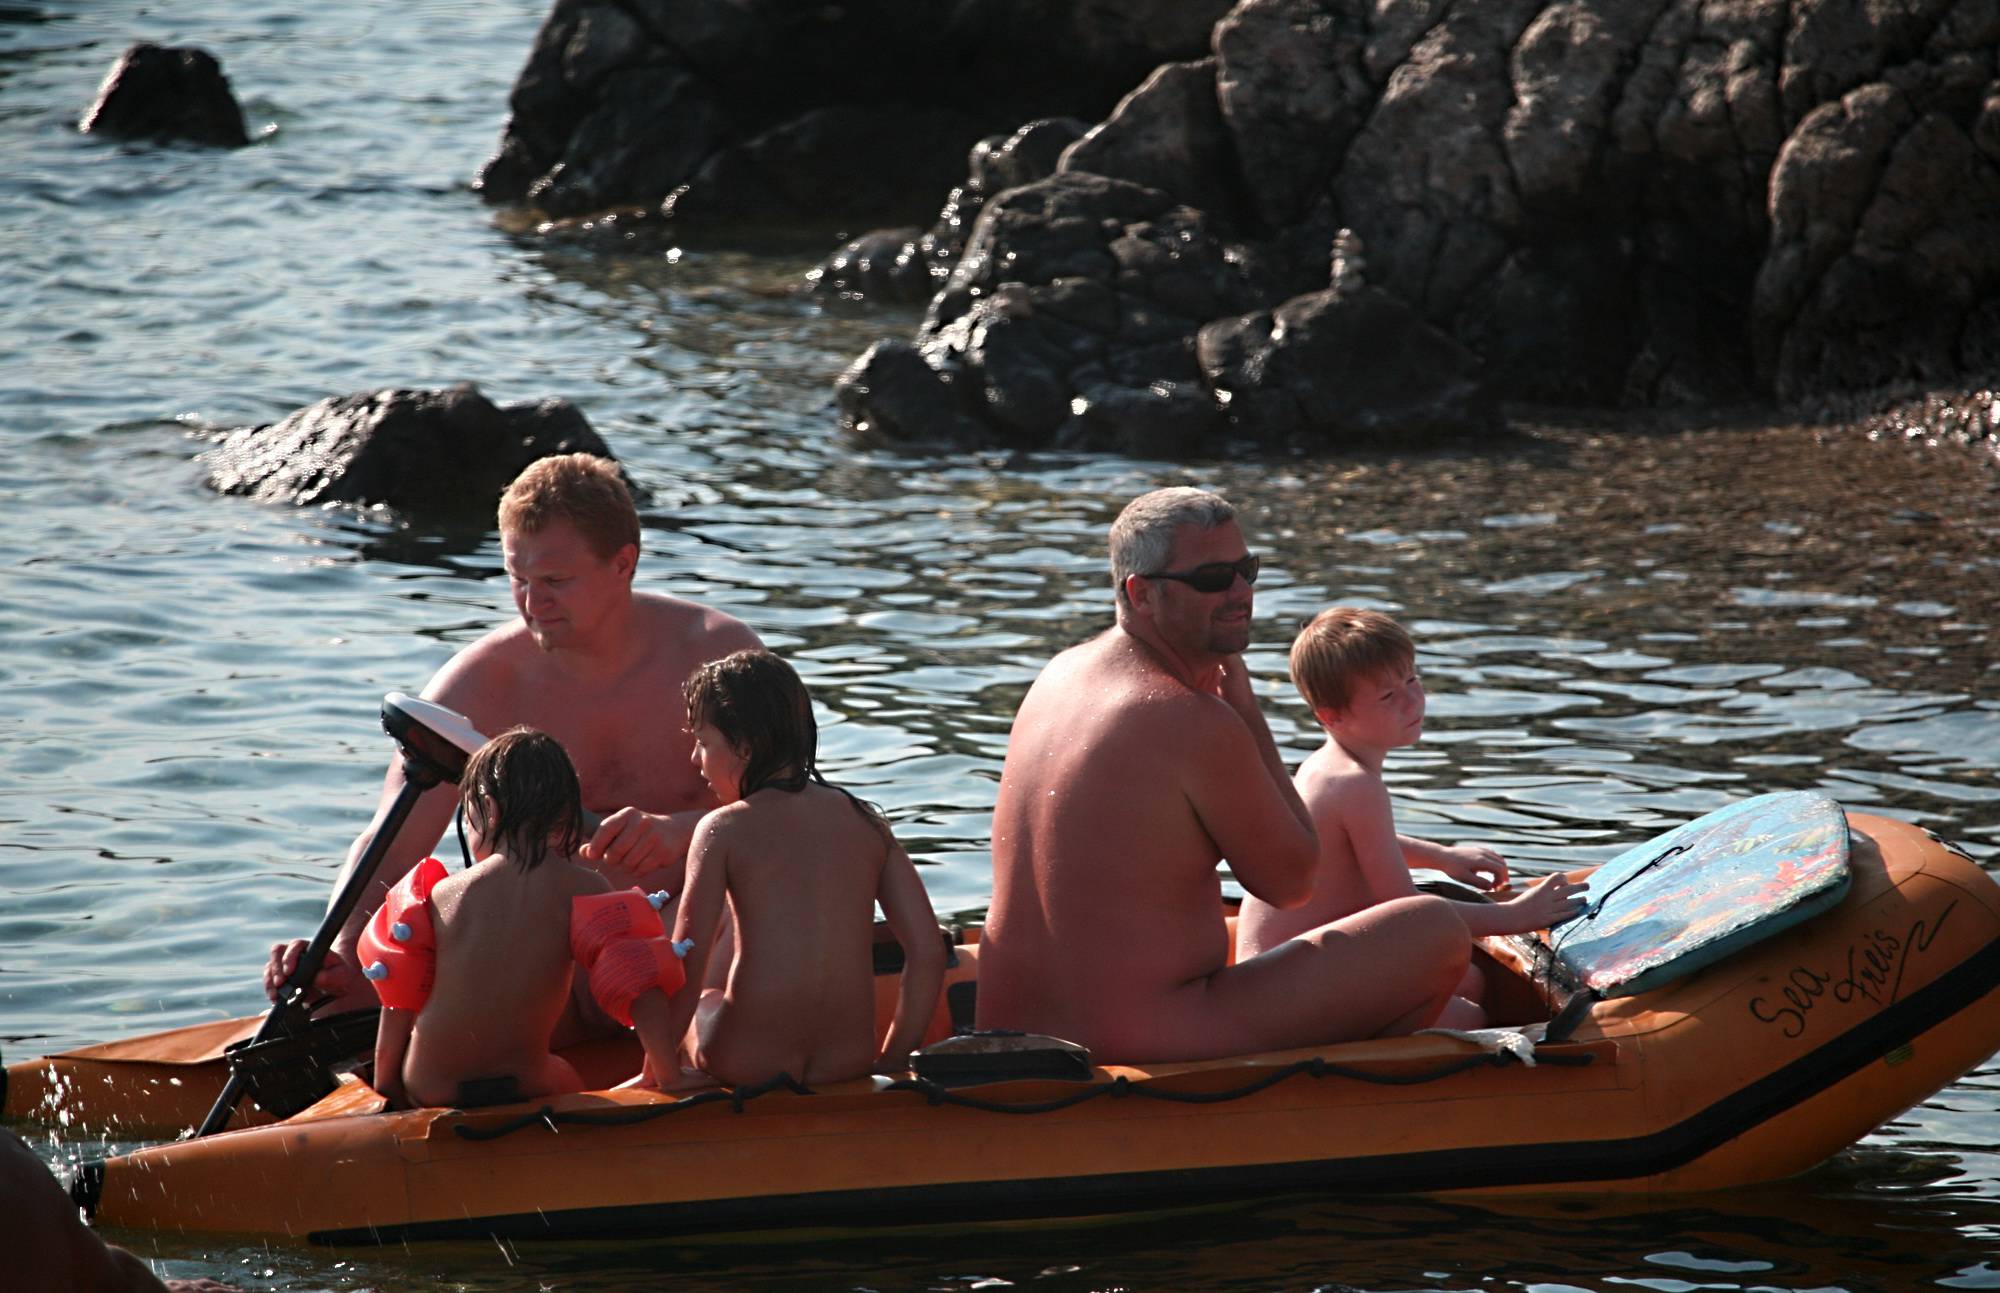 Pure Nudism Gallery Full Family Nudist Boating - 1